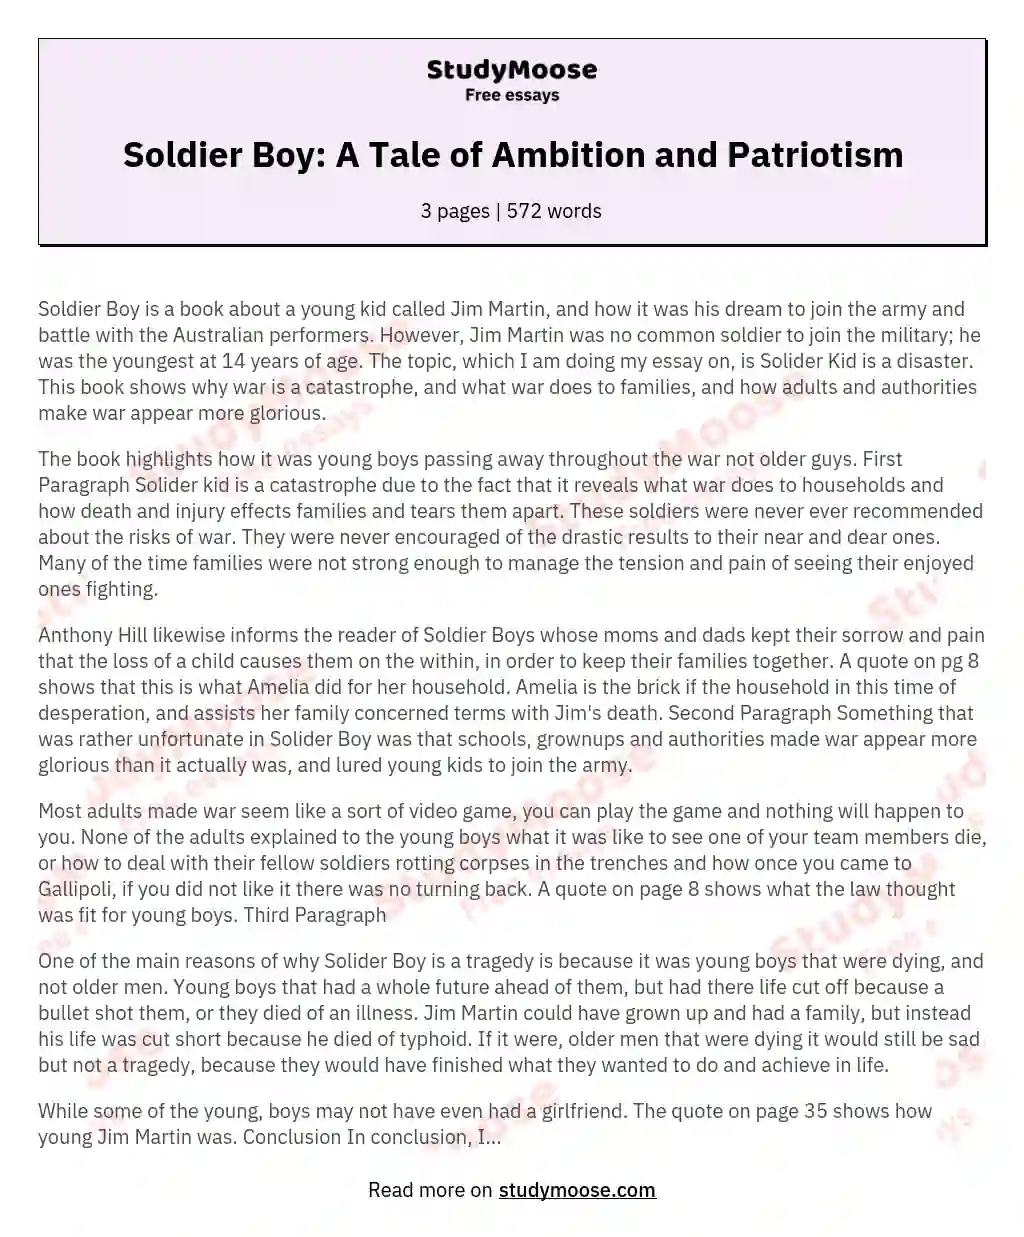 Soldier Boy: A Tale of Ambition and Patriotism essay